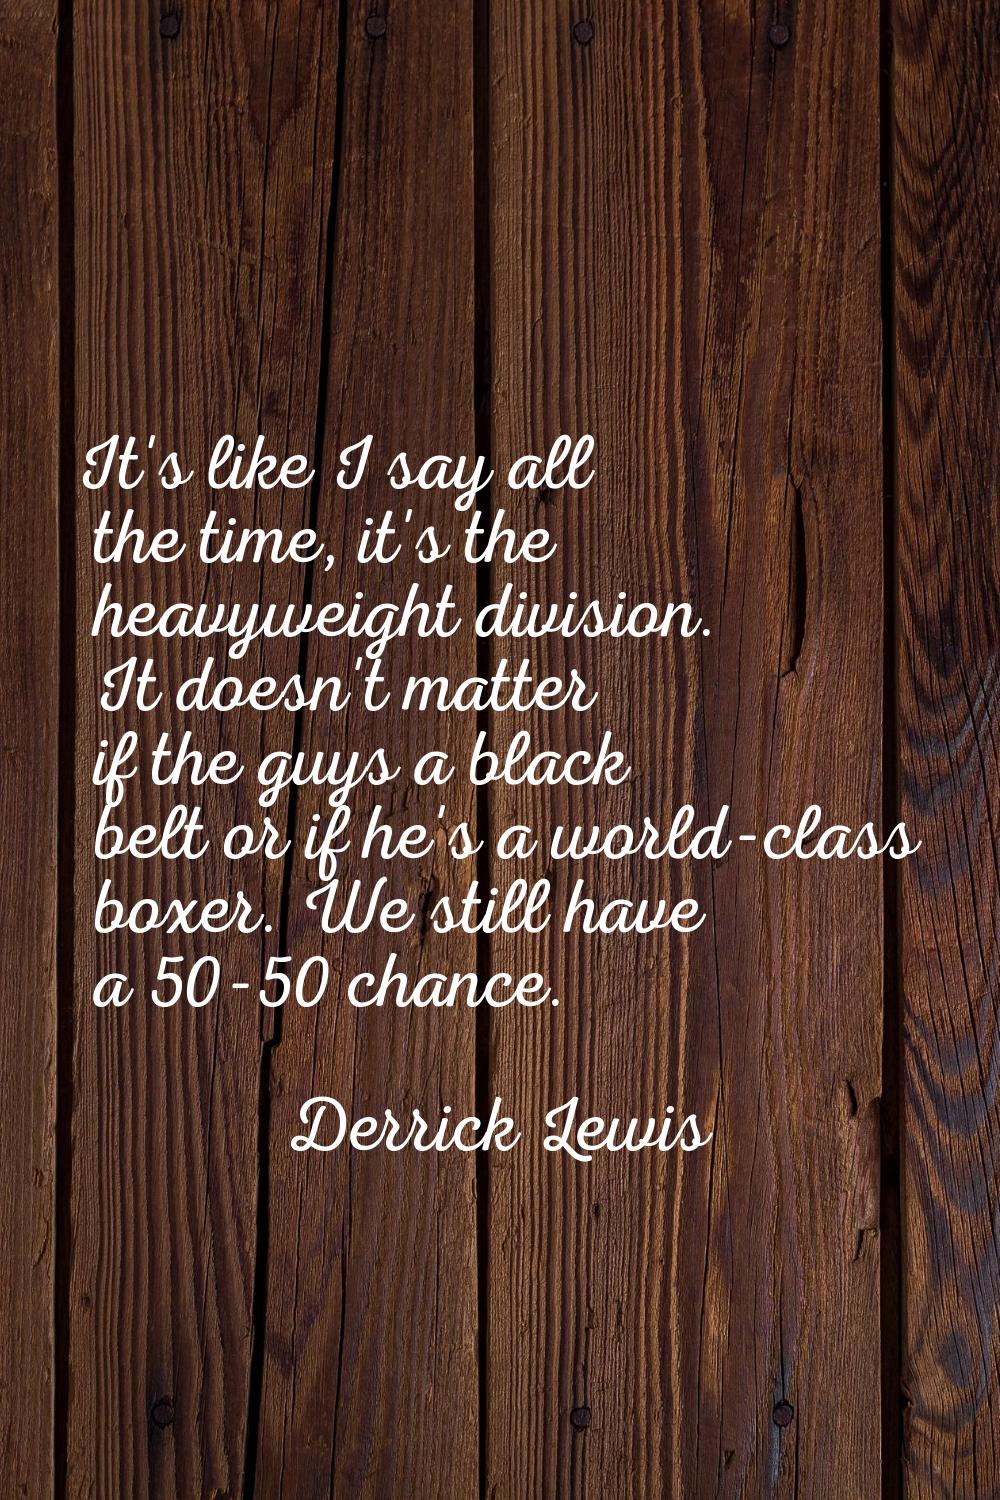 It's like I say all the time, it's the heavyweight division. It doesn't matter if the guys a black 